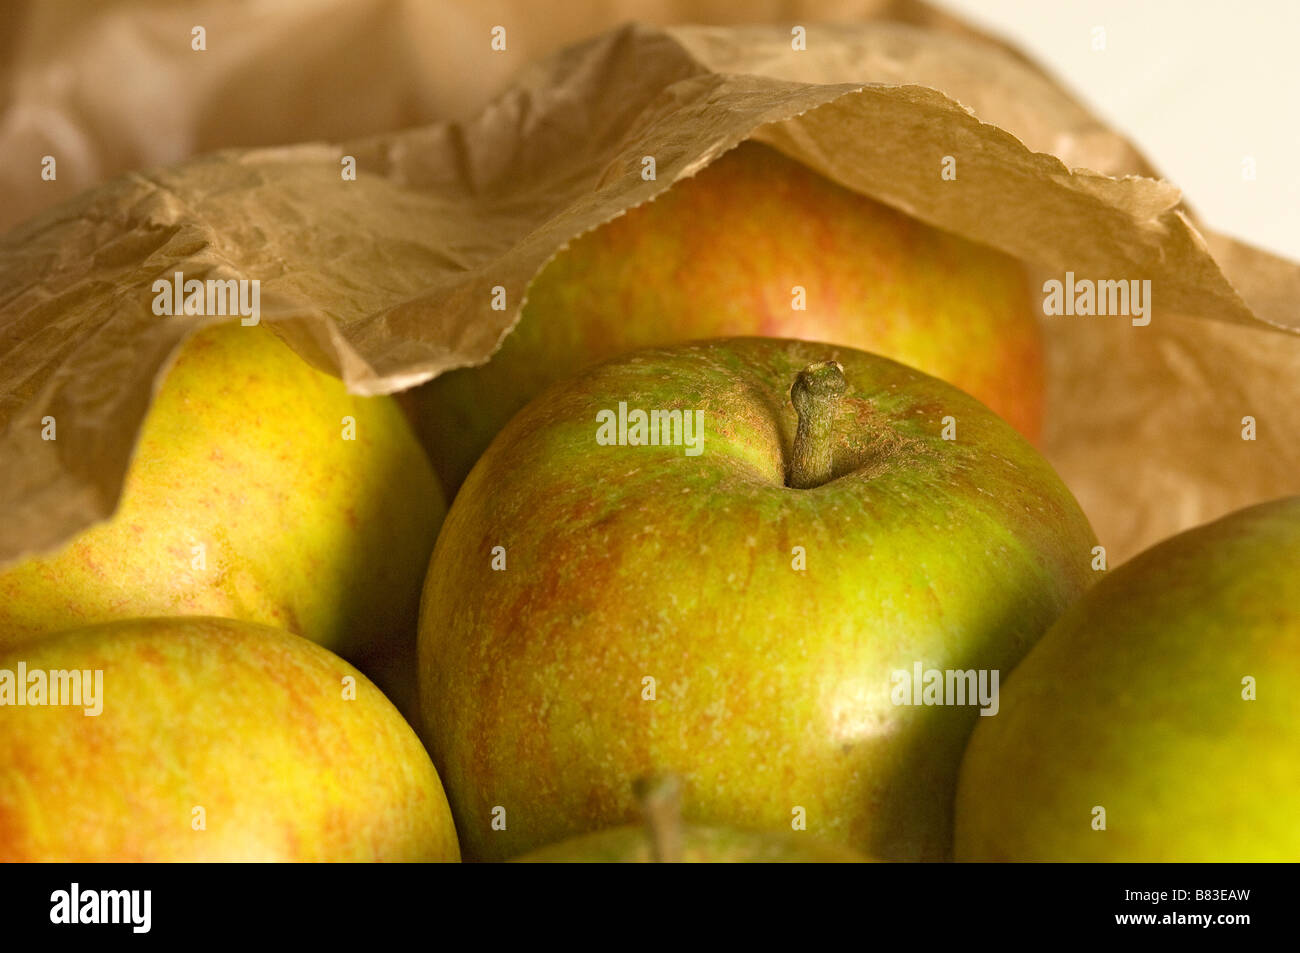 Coxs orange pippin apples apple in brown paper bag close up Stock Photo